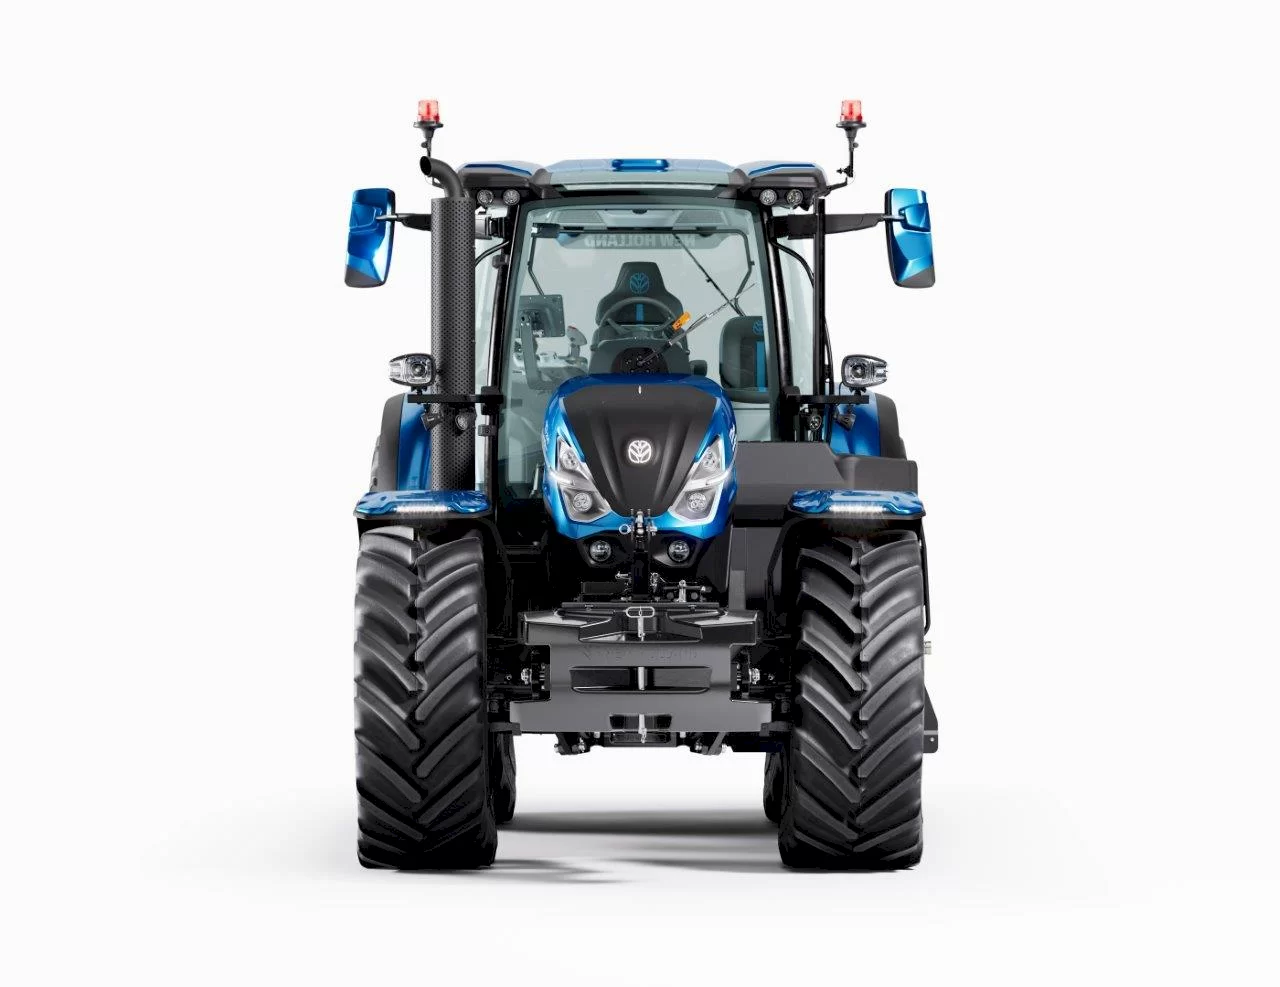 New Holland Agriculture debuts world's first LNG tractor